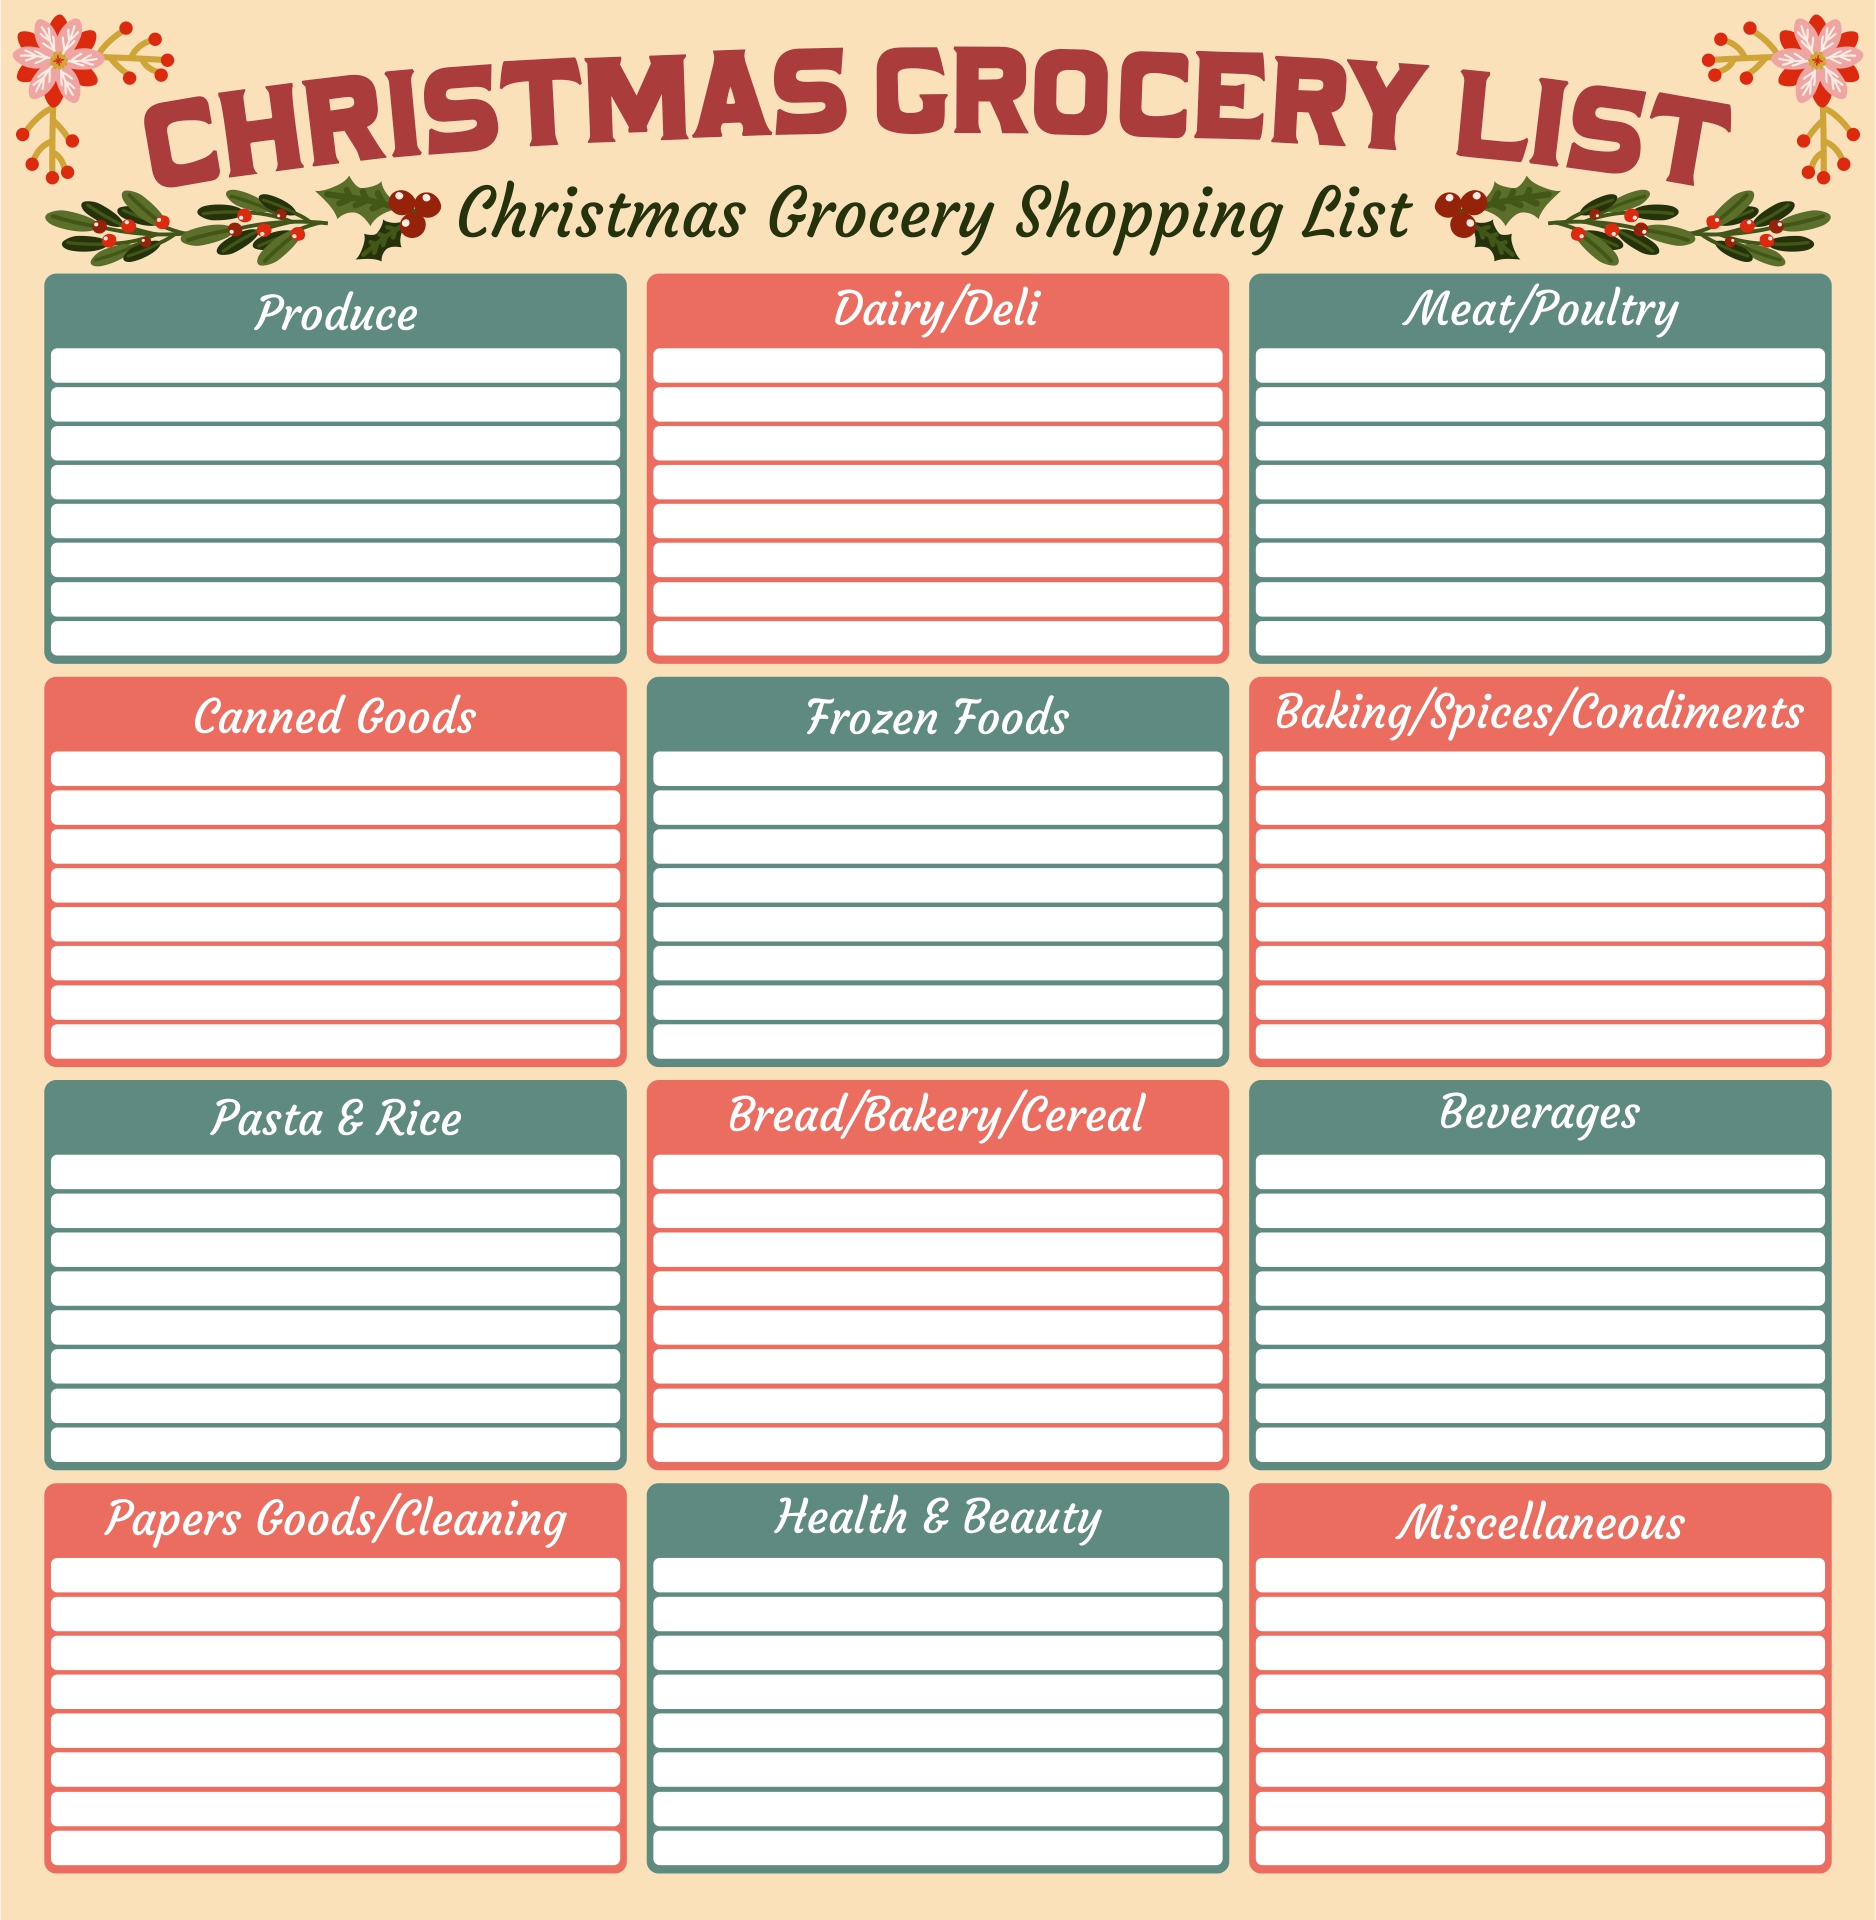 Printable Christmas Grocery List For Your Holiday Meals